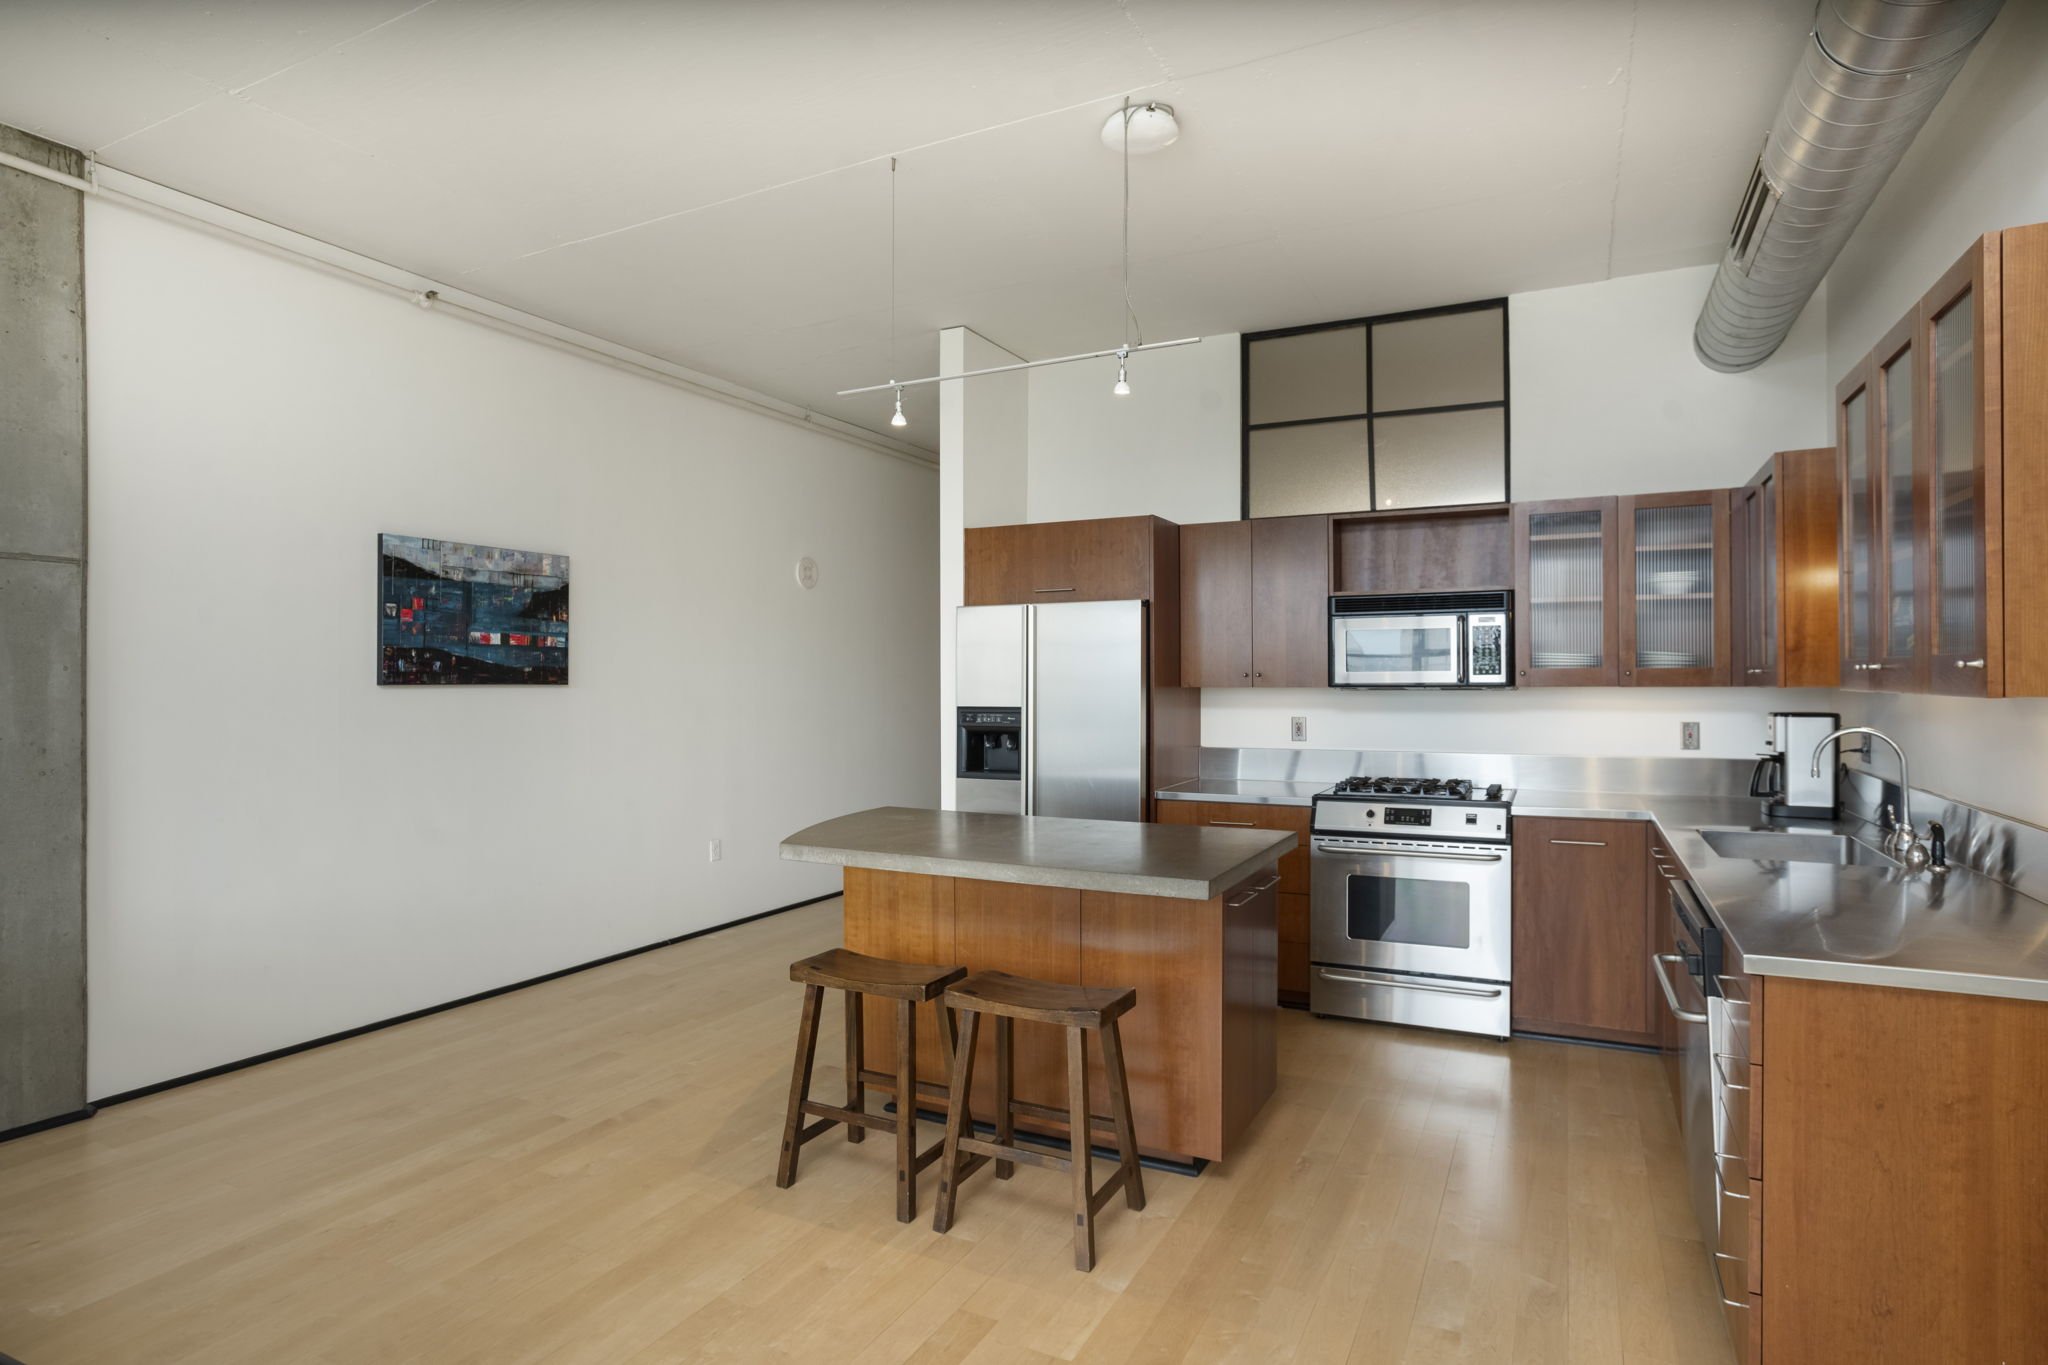 11-web-or-mls-420-nw-11th-ave-920.jpg